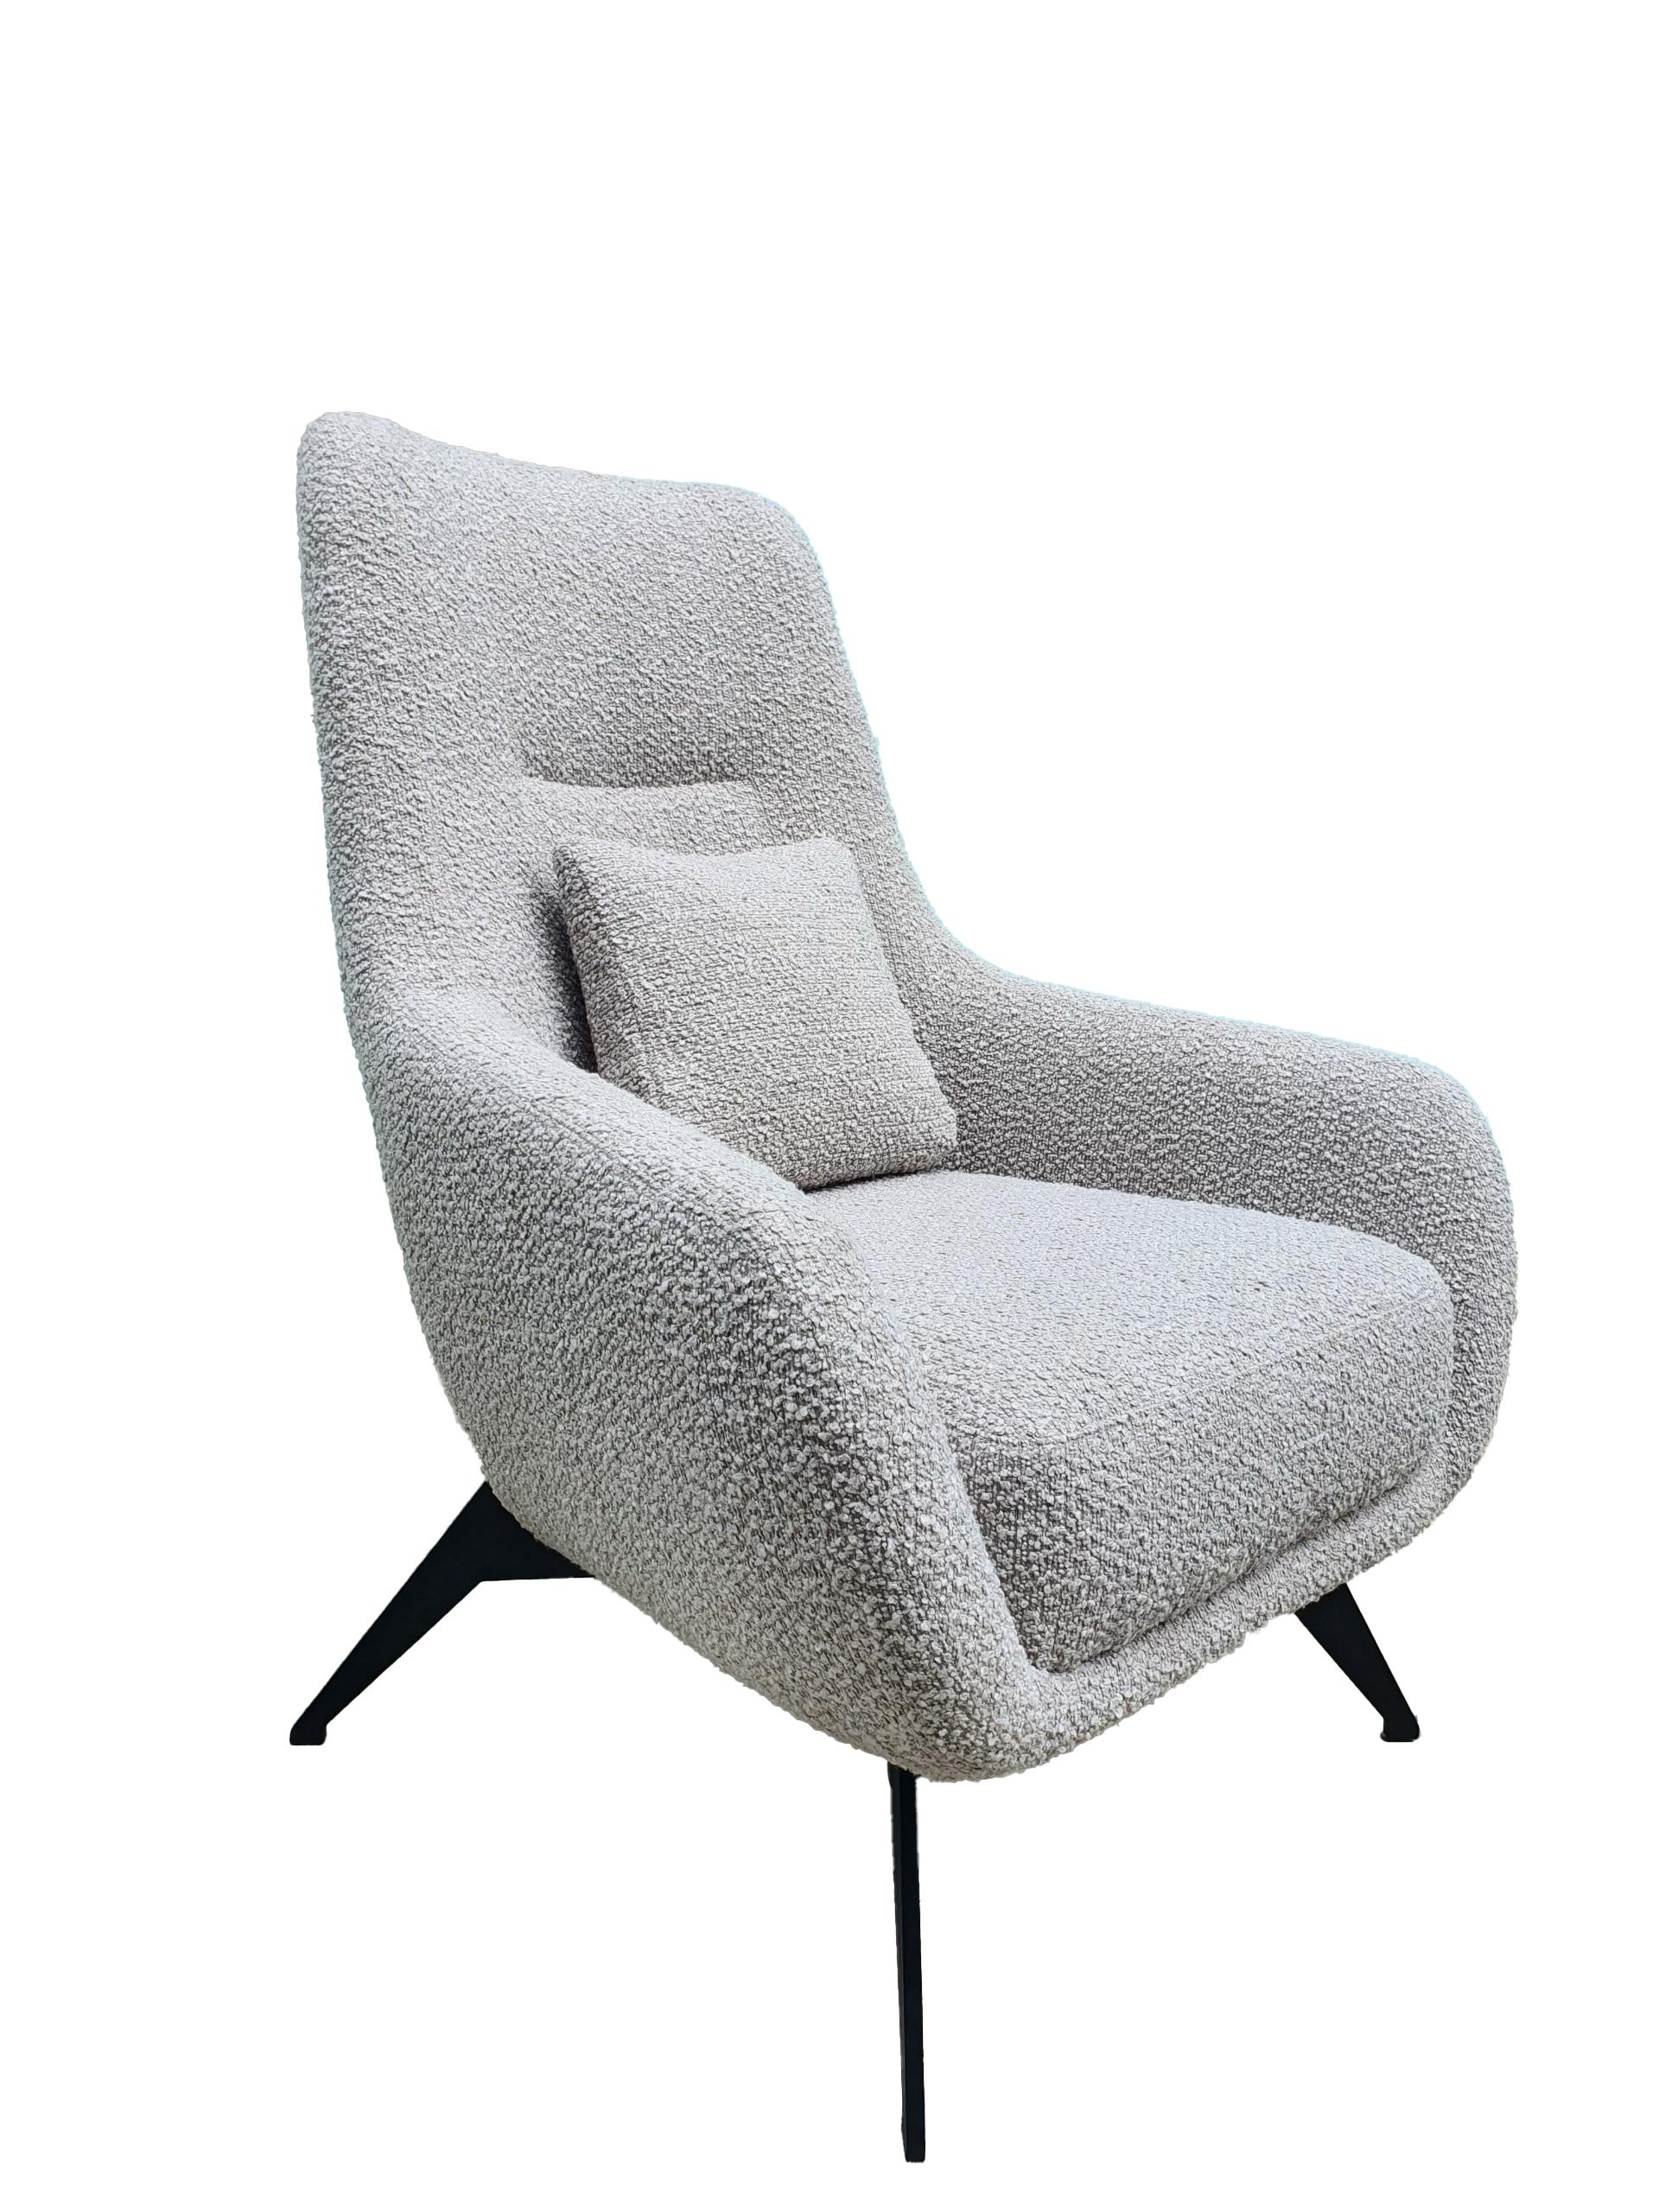 Minimalist Lounge Chair - Modern Sculptural Seating For Sale